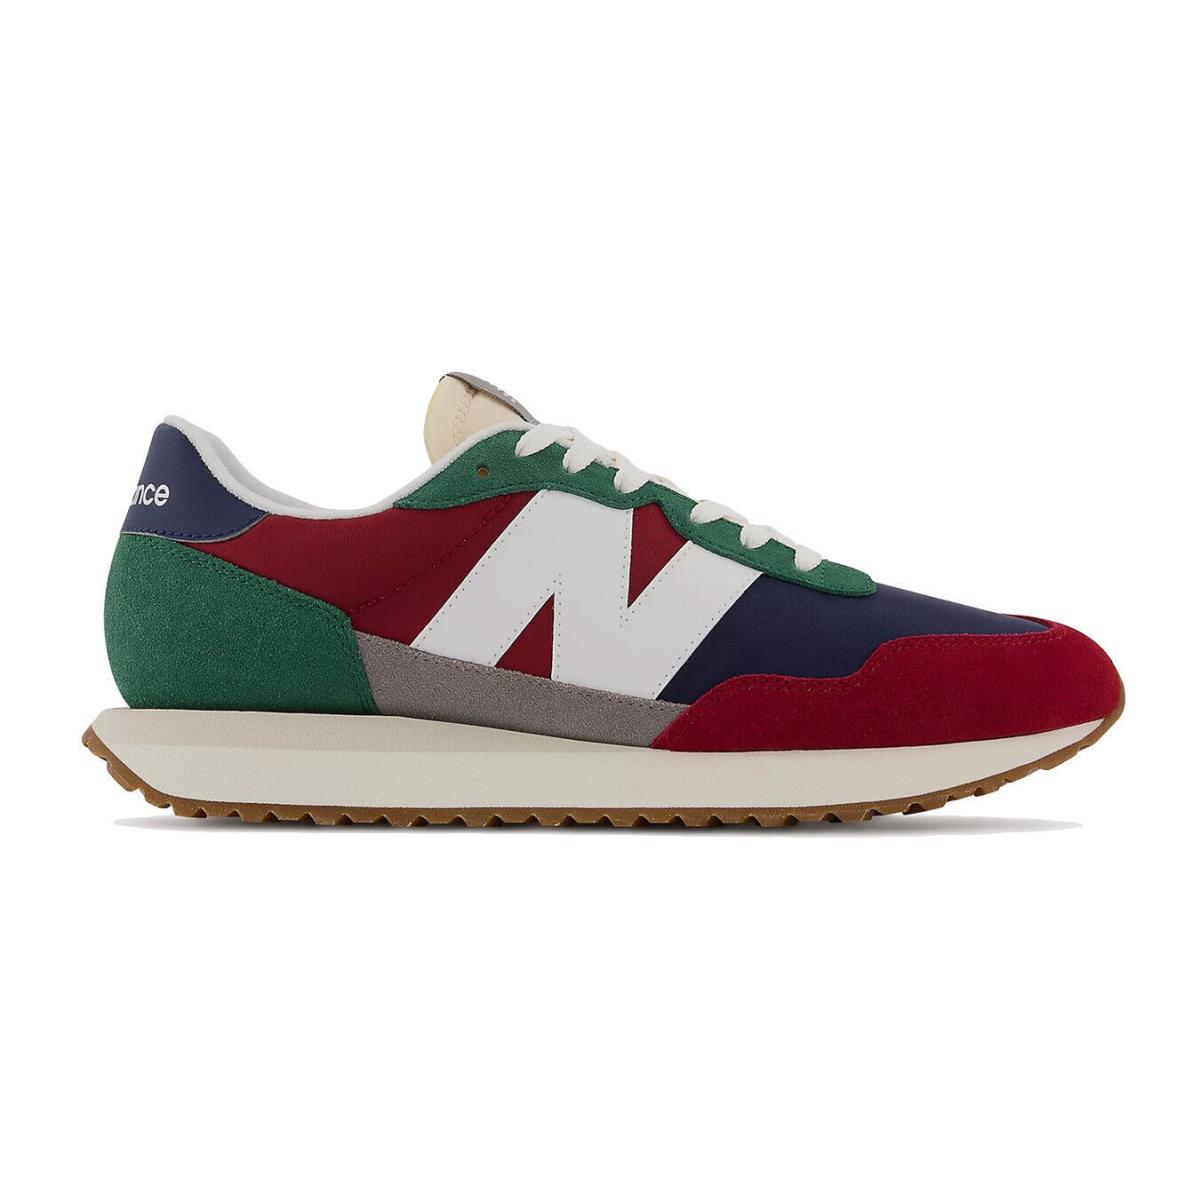 New Balance shoes  - Red/Green/Navy Blue 0